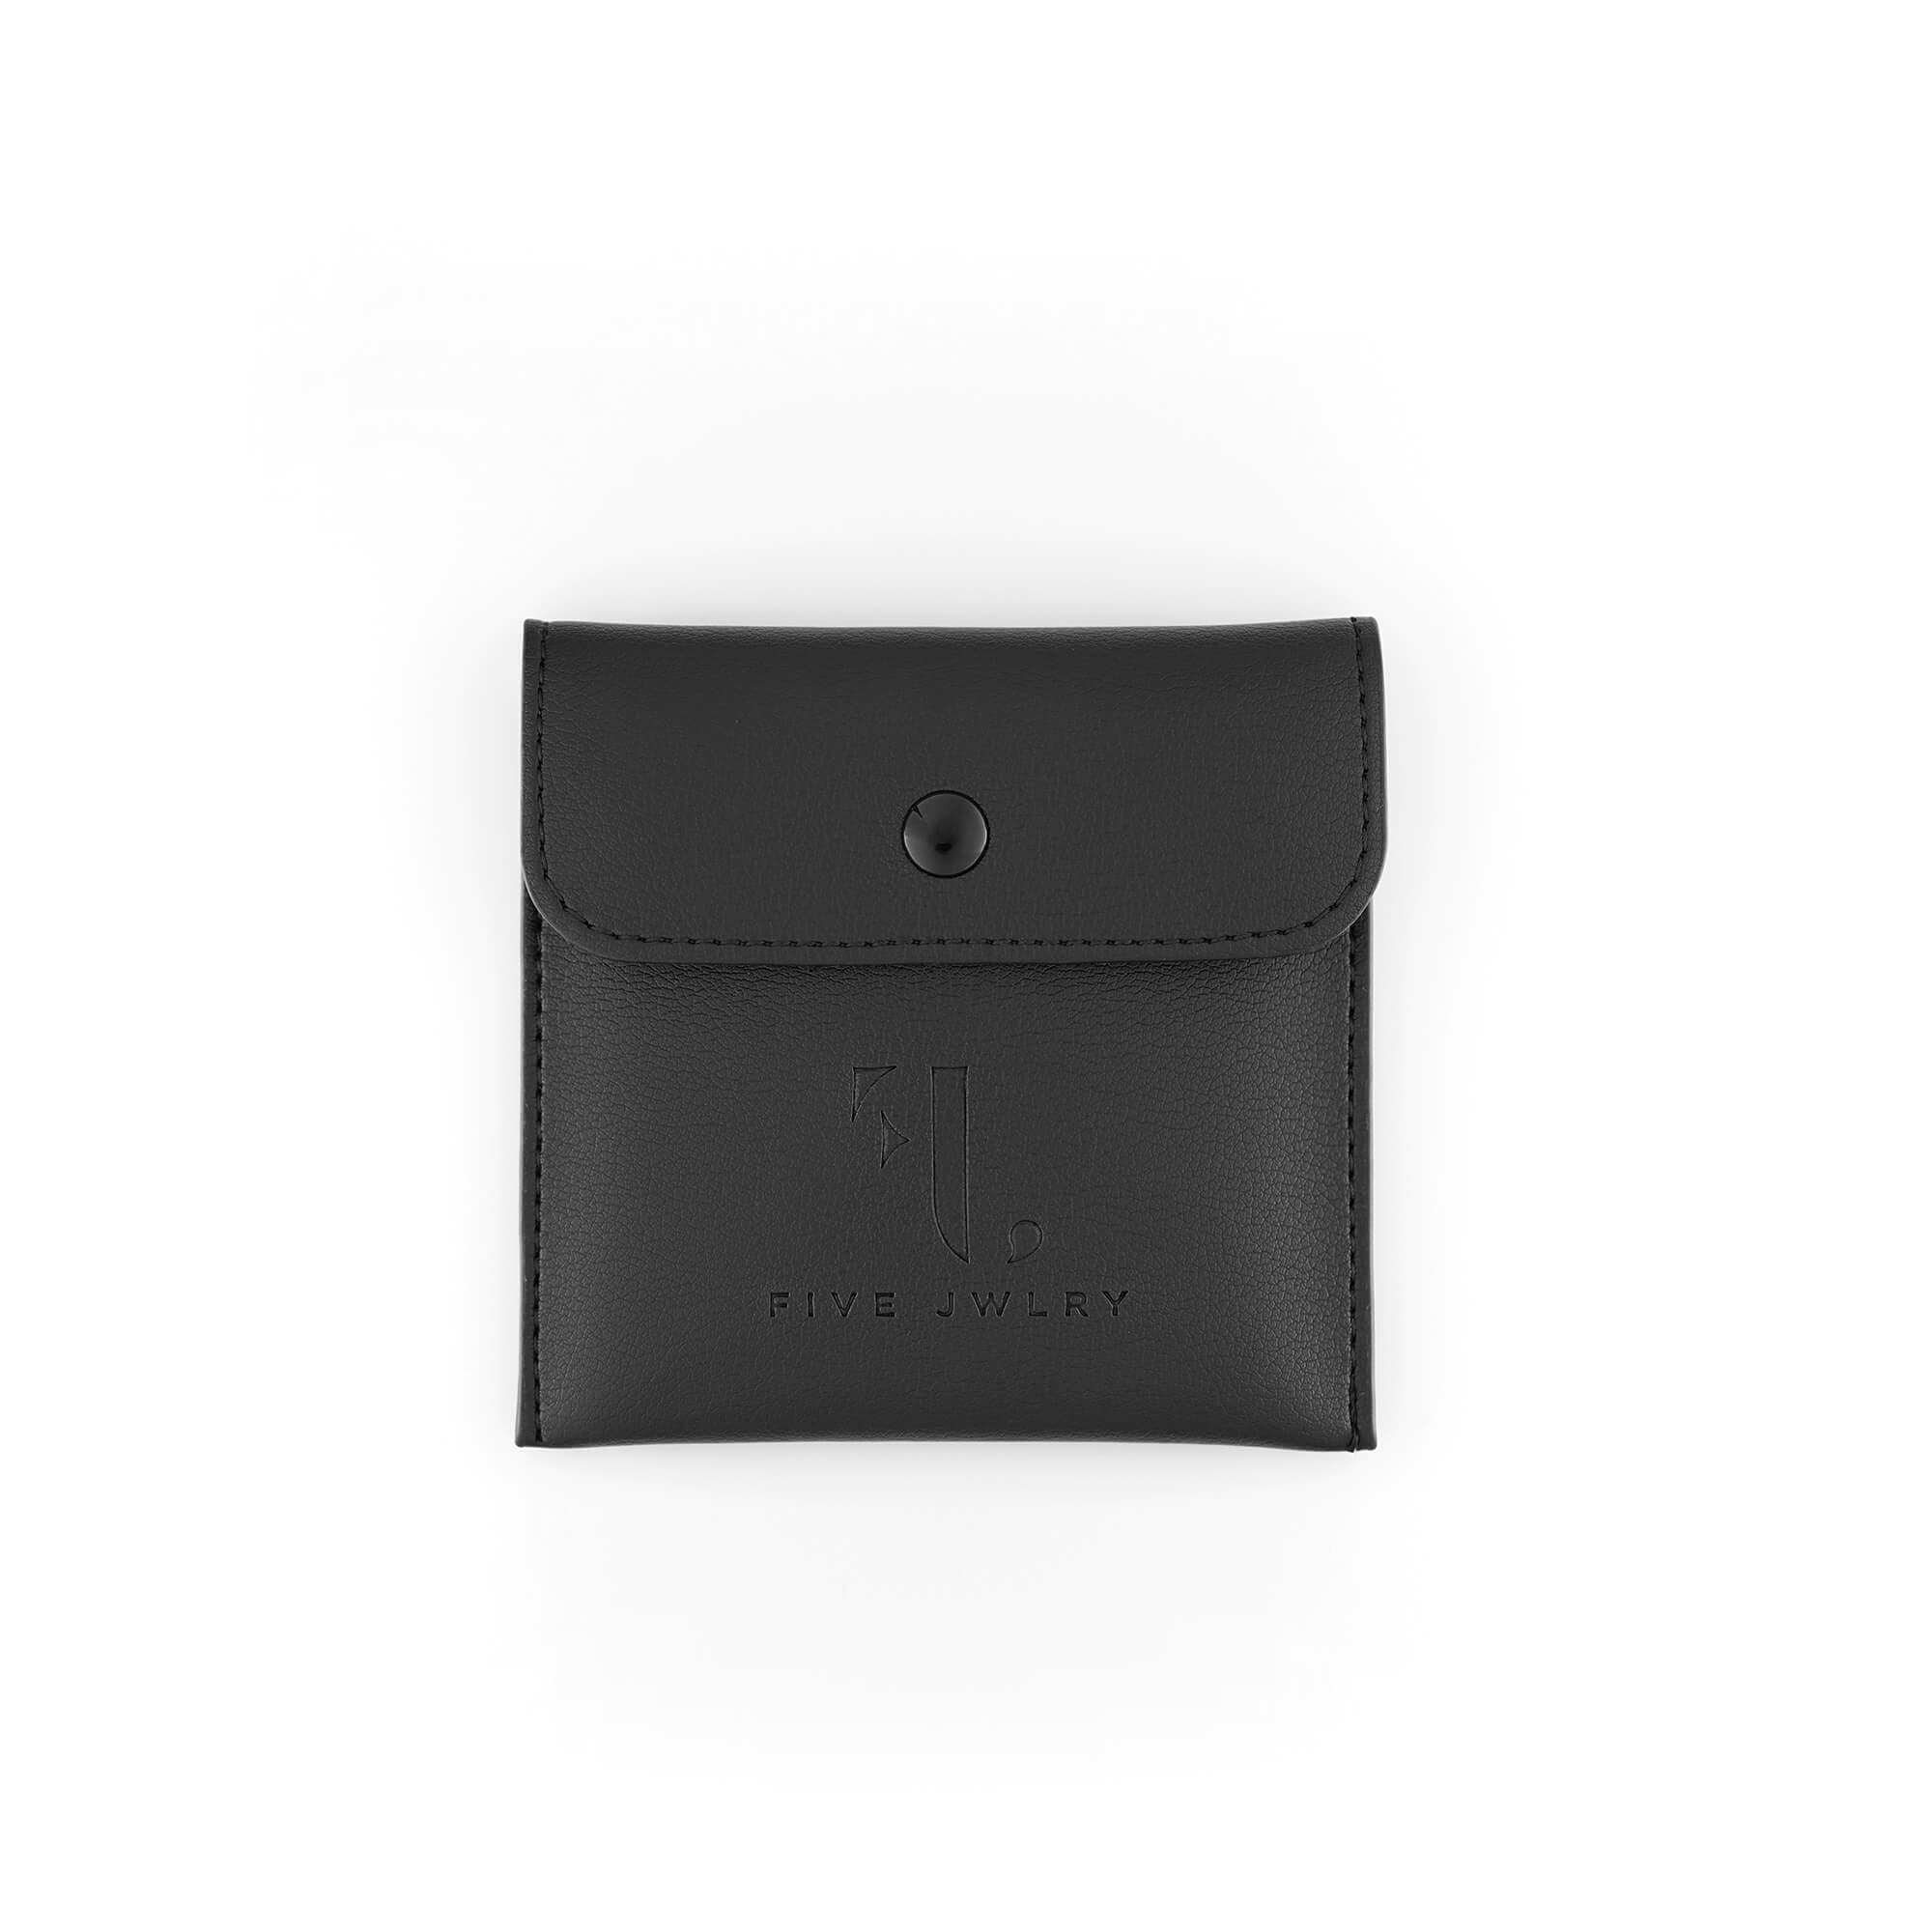 Genuine black leather jewelry pouch with embossed FIVE JWLRY logo.